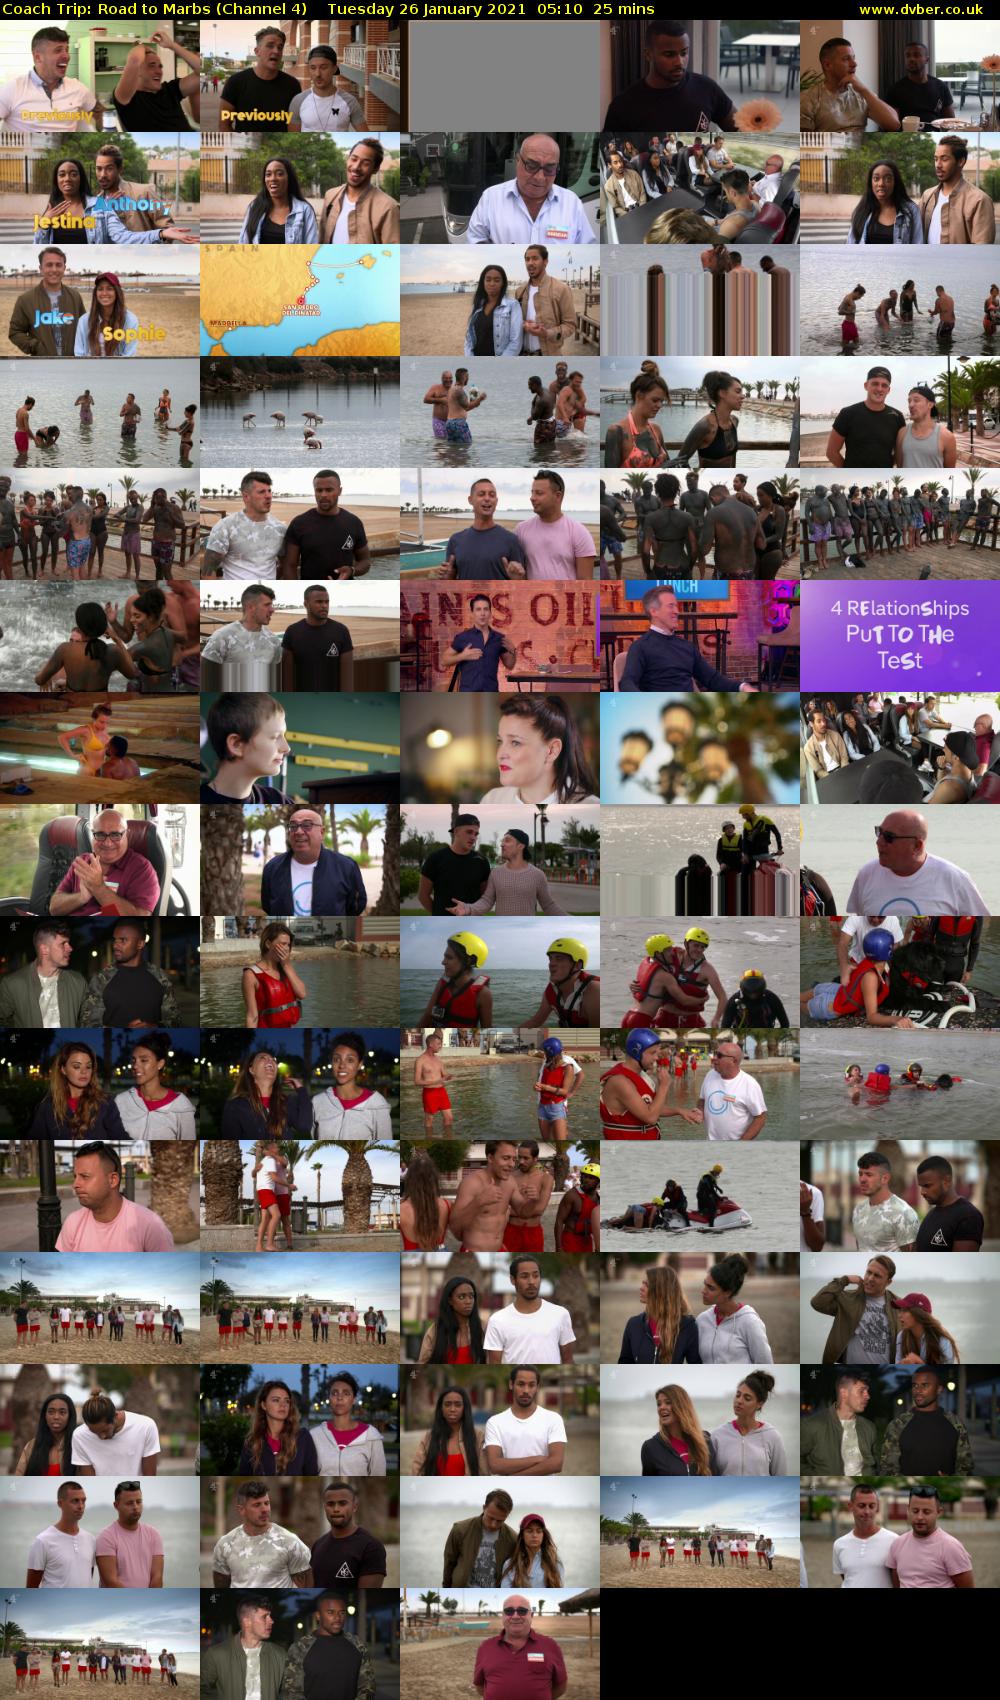 Coach Trip: Road to Marbs (Channel 4) Tuesday 26 January 2021 05:10 - 05:35